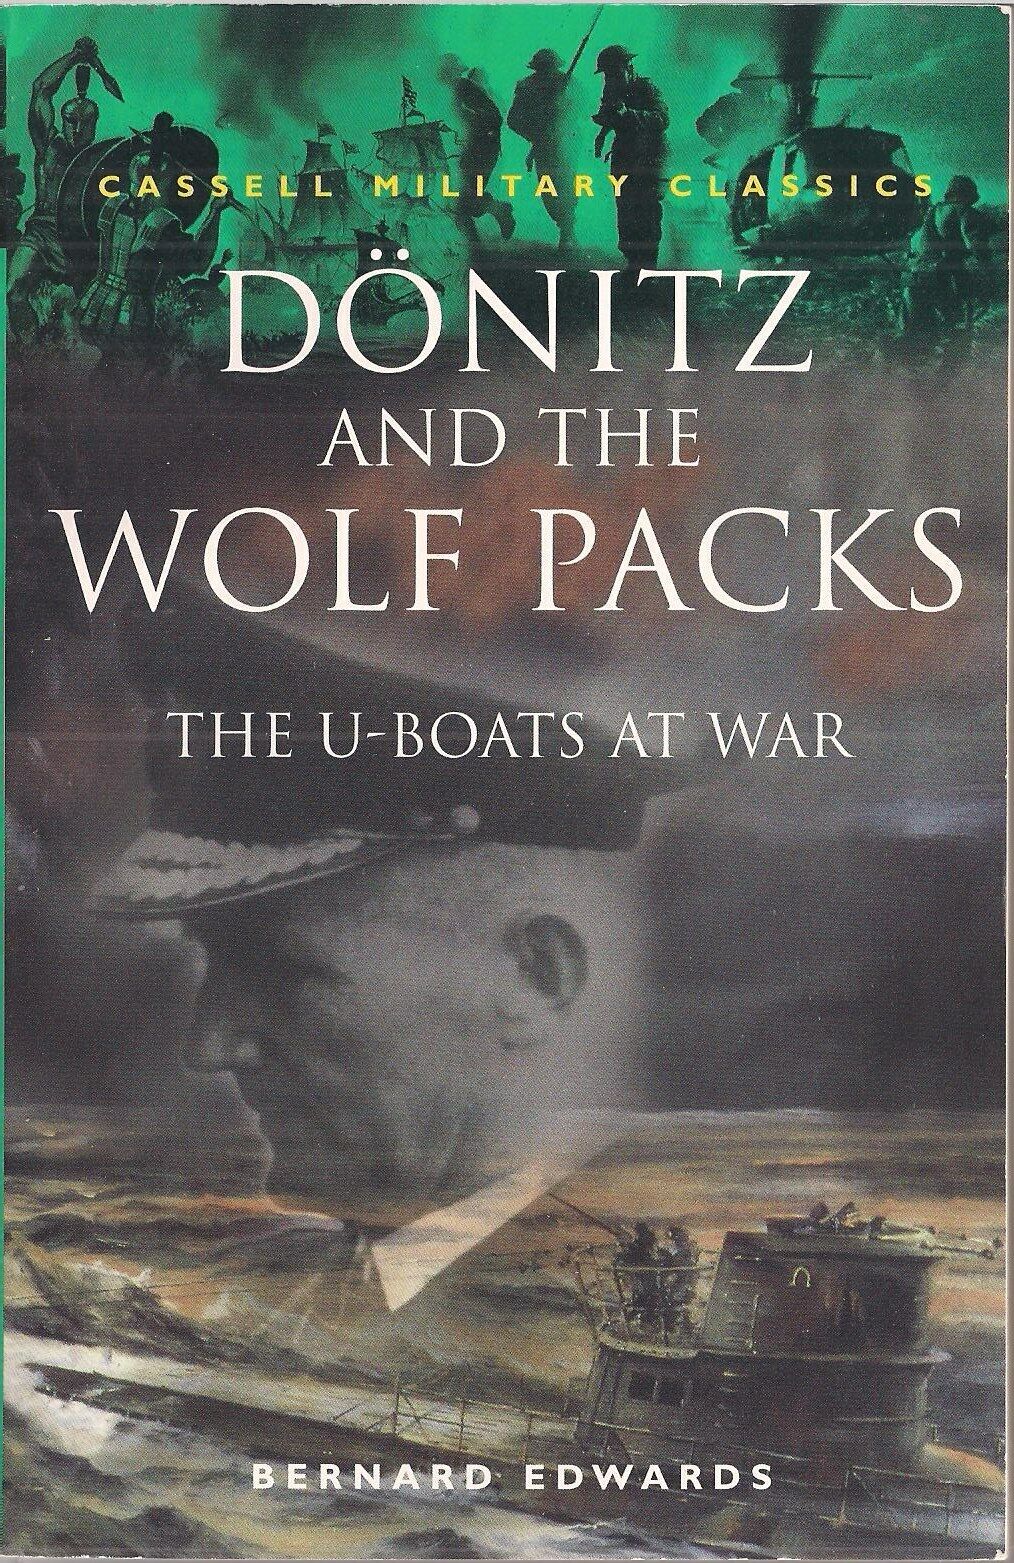 Doenitz And The Wolf Packs, The U-boats At War By Bernard Edwards